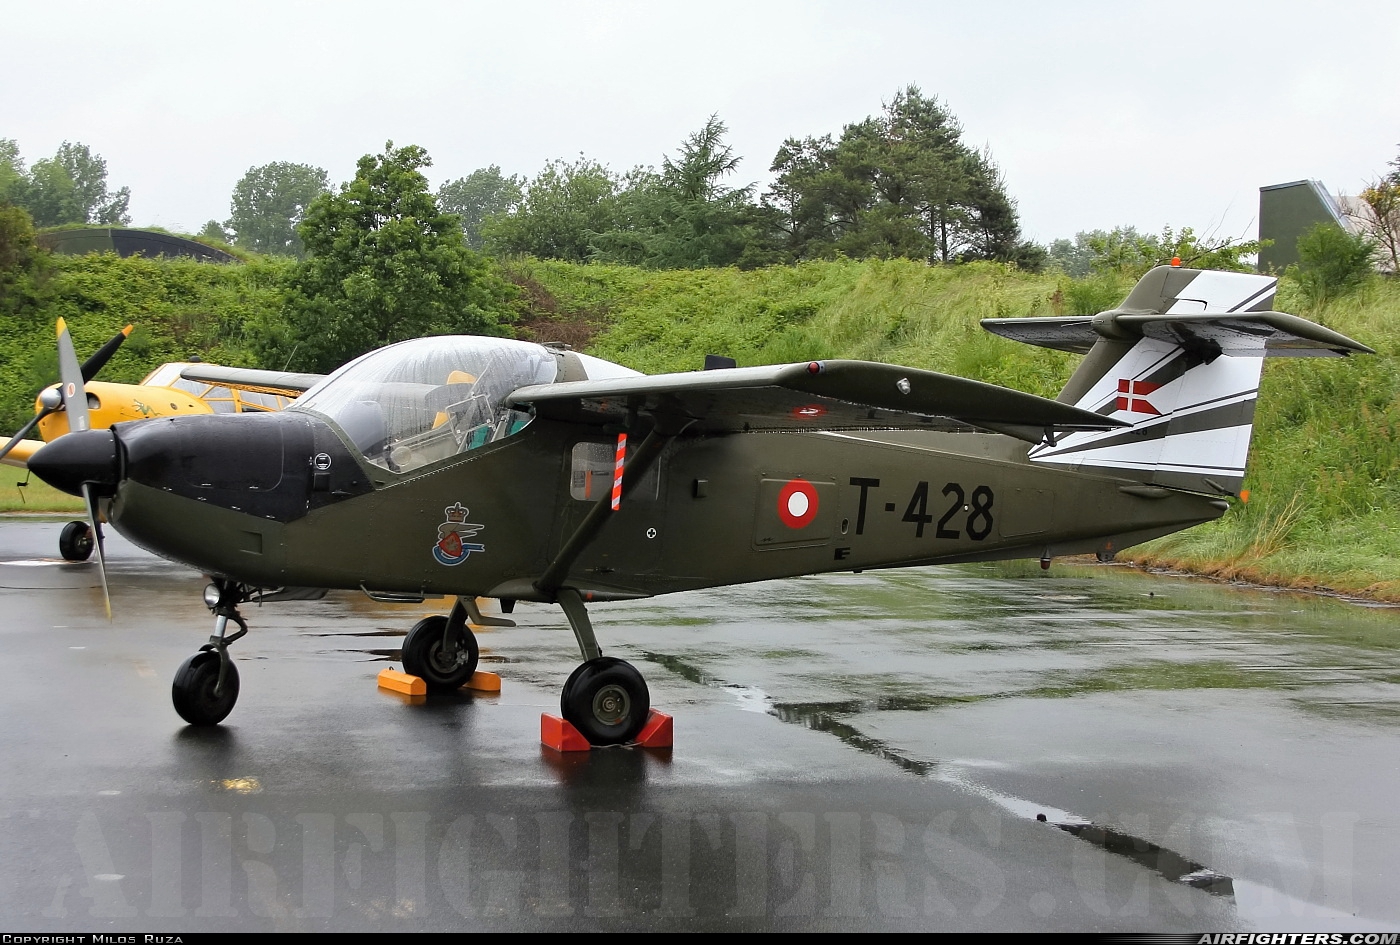 Denmark - Air Force Saab MFI T-17 Supporter T-428 at Wittmundhafen (Wittmund) (ETNT), Germany